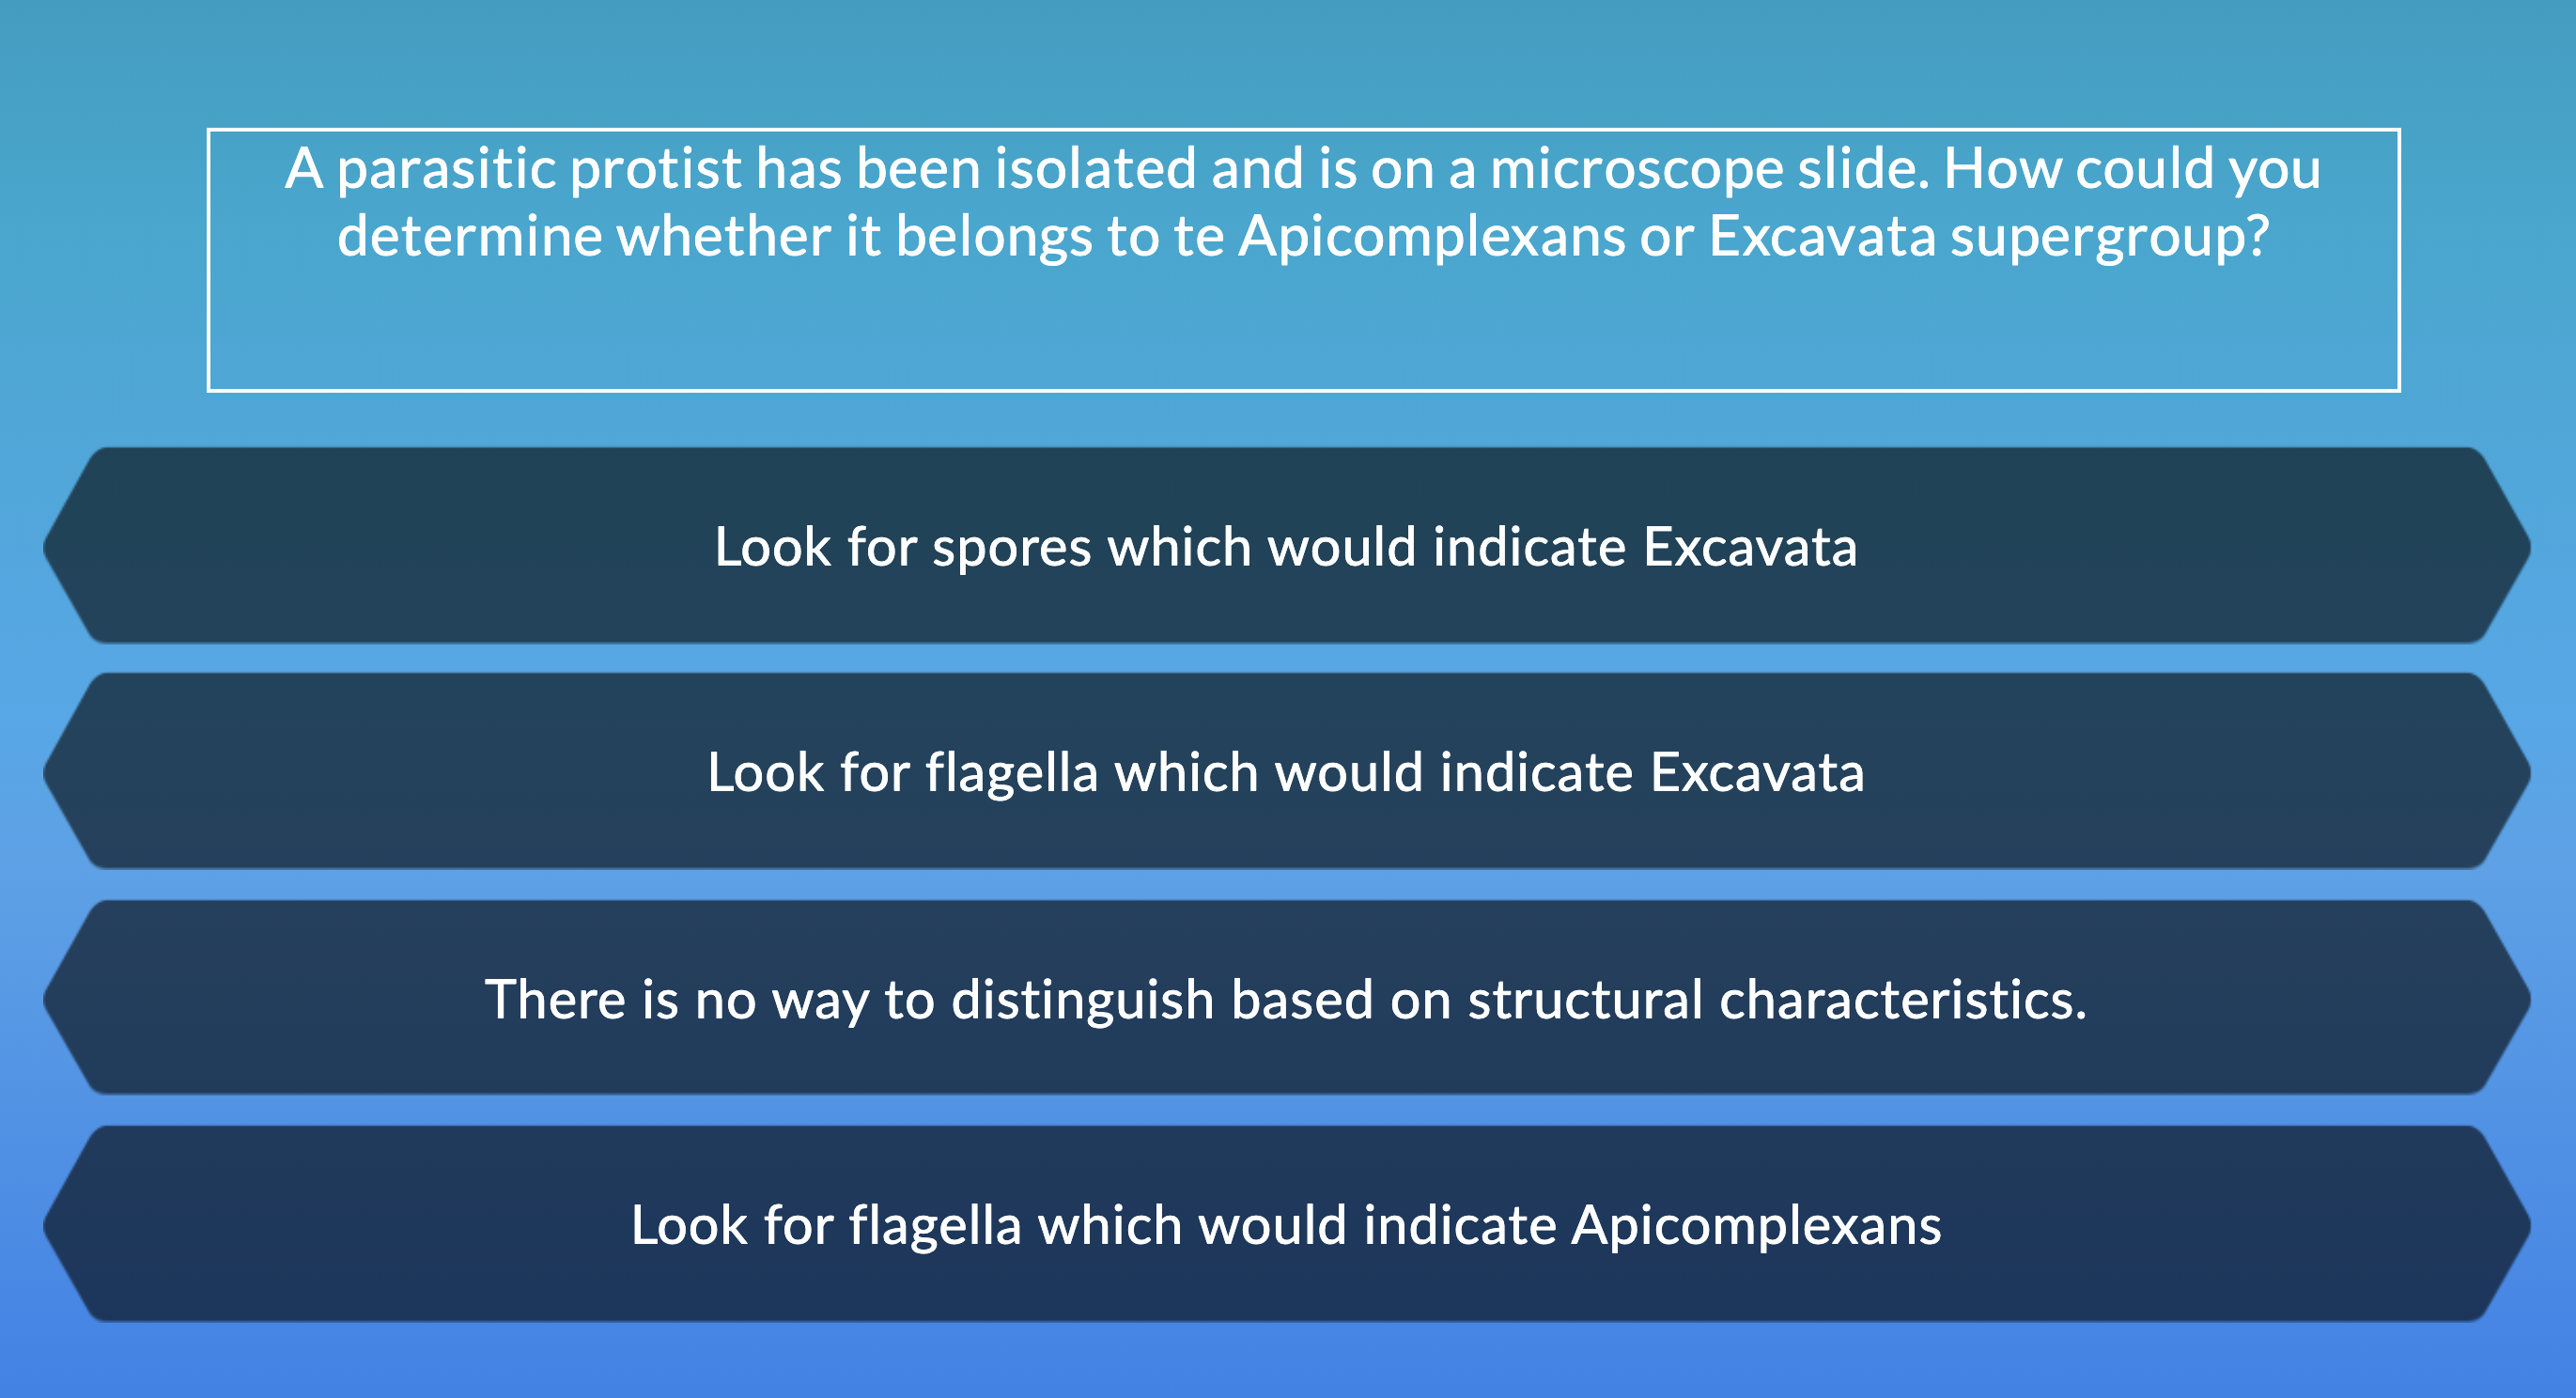 A parasitic protist has been isolated and is on a microscope slide. How could you
determine whether it belongs to te Apicomplexans or Excavata supergroup?
Look for spores which would indicate Excavata
Look for flagella which would indicate Excavata
There is no way to distinguish based on structural characteristics.
Look for flagella which would indicate Apicomplexans
